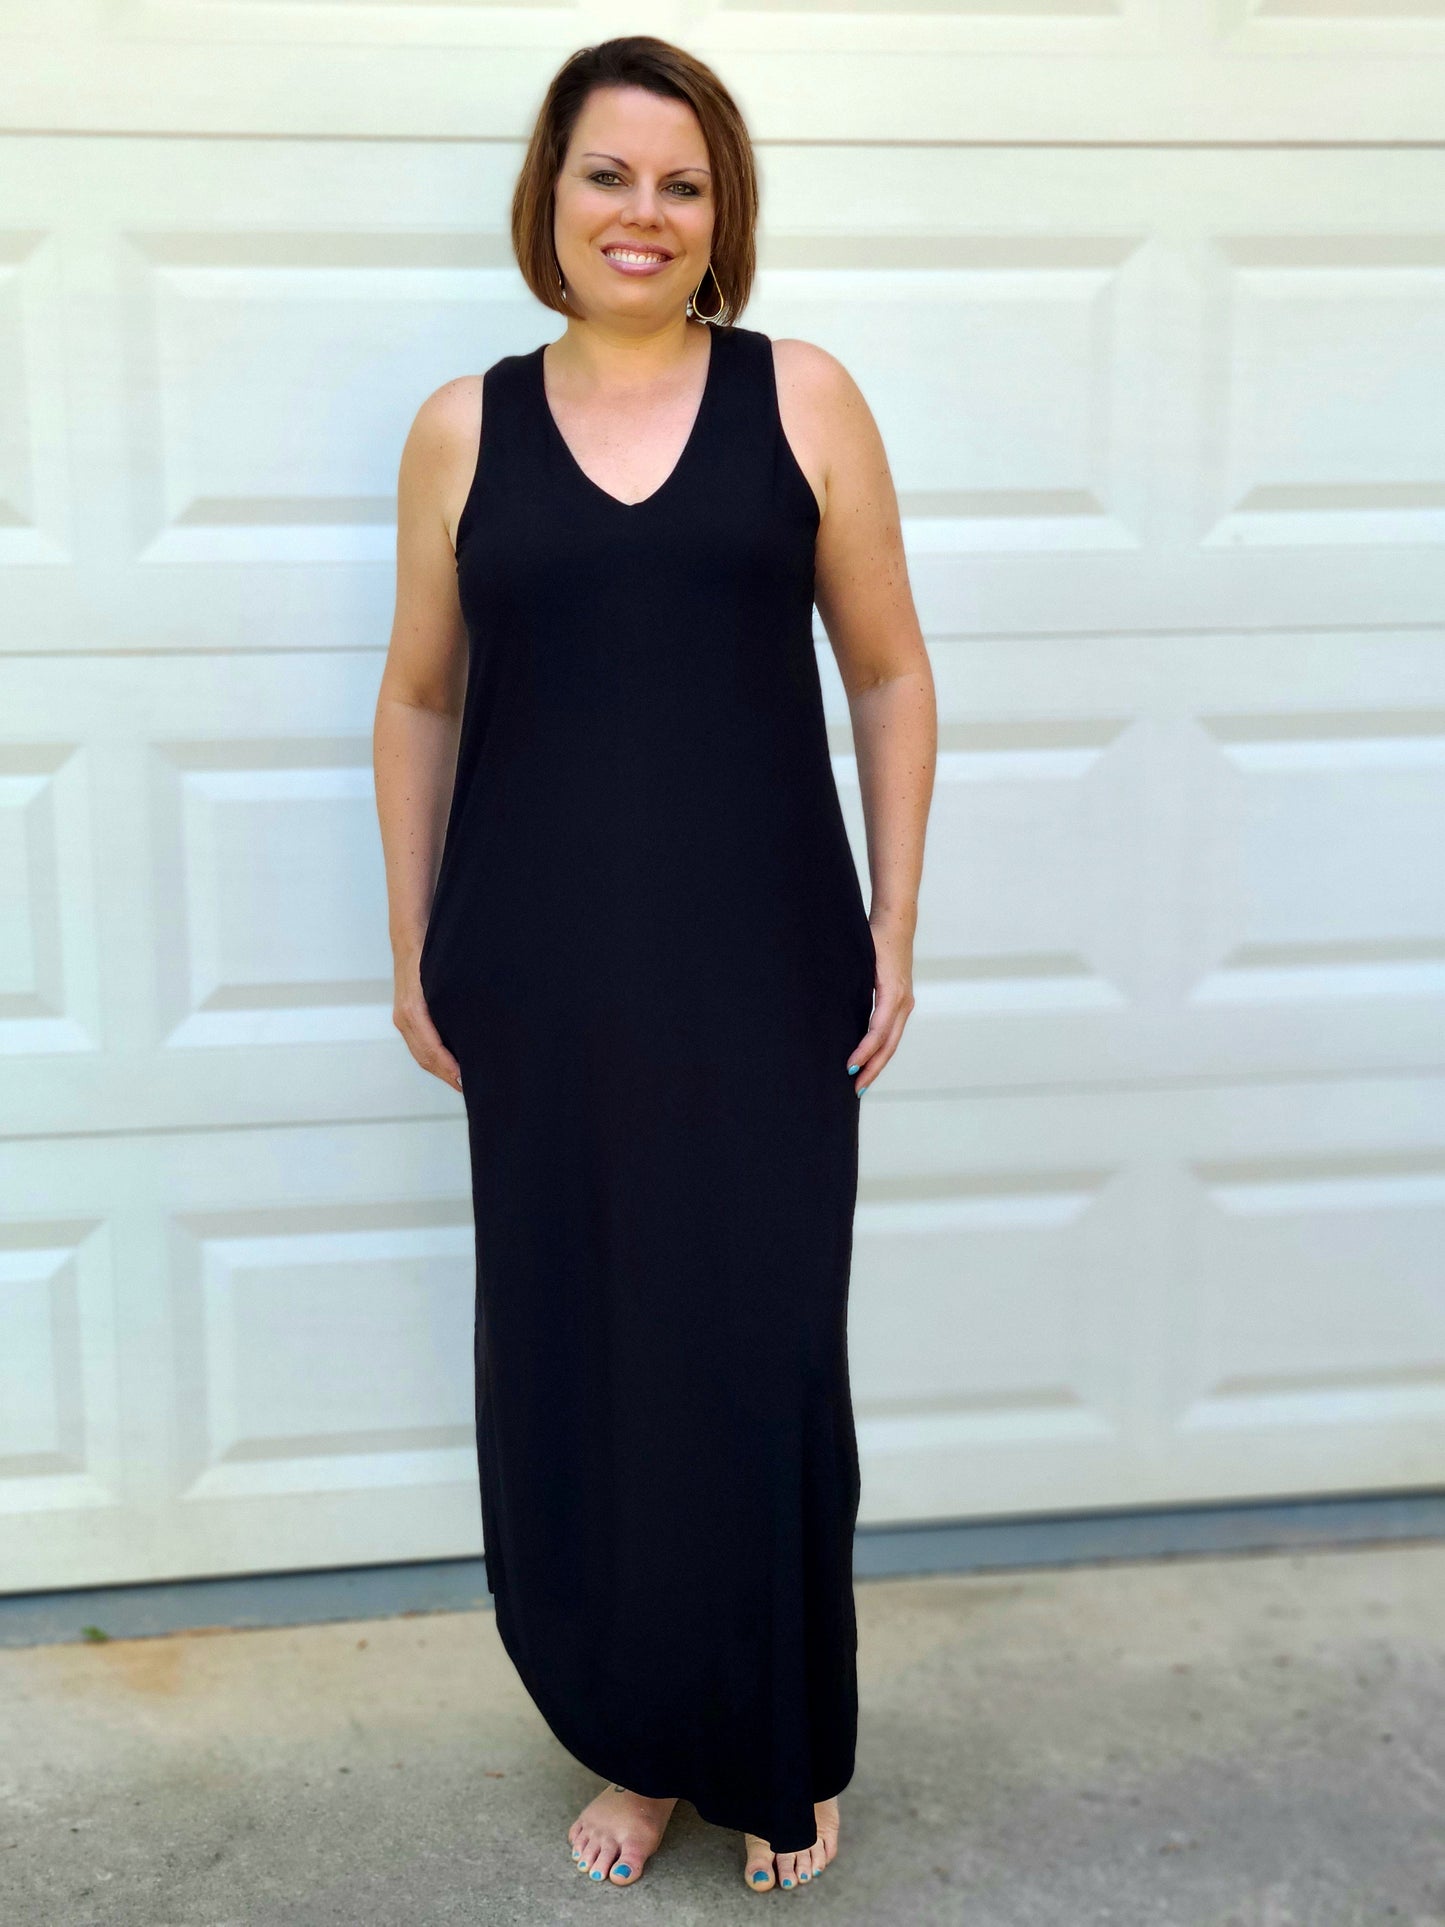 This gorgeous maxi dress is a must-have for any afternoon out with your BFFs. We love the classic black color - it's so chic and easy to dress up or down! The bodice features a v-neckline, side pockets and is so soft and comfortable. You can dress it up with edges and a floppy hot for vacation days!